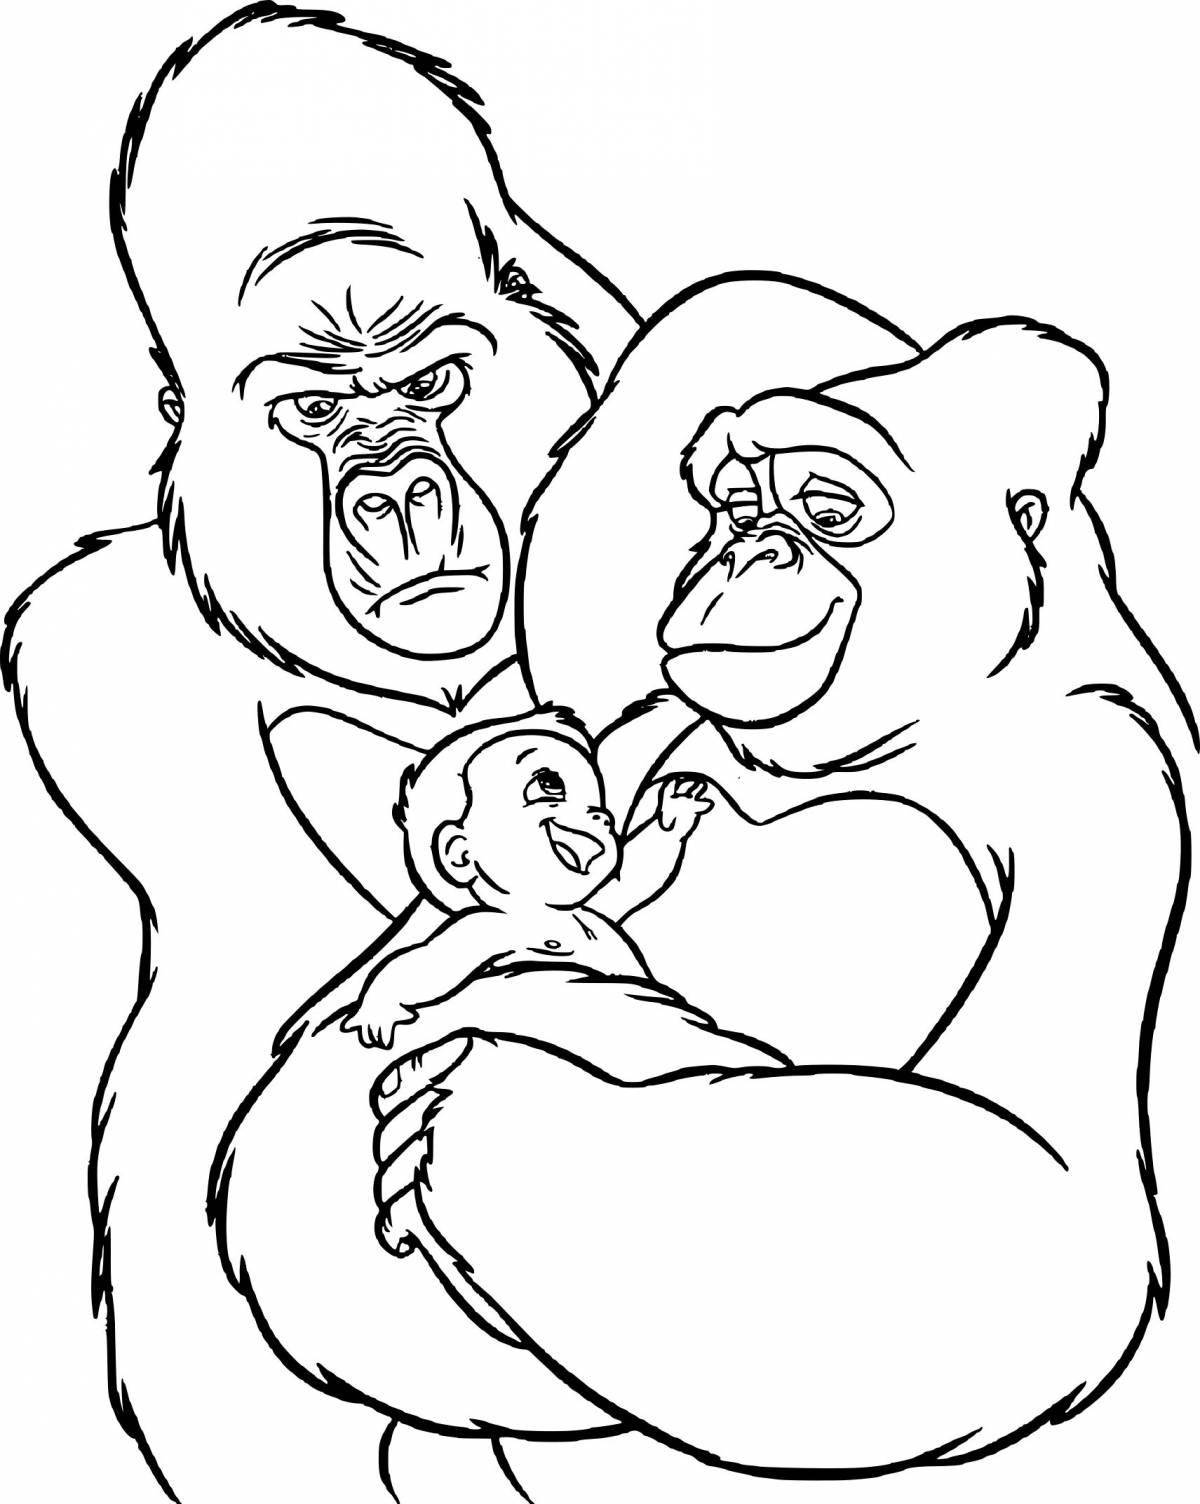 Colorful gorilla coloring book for kids